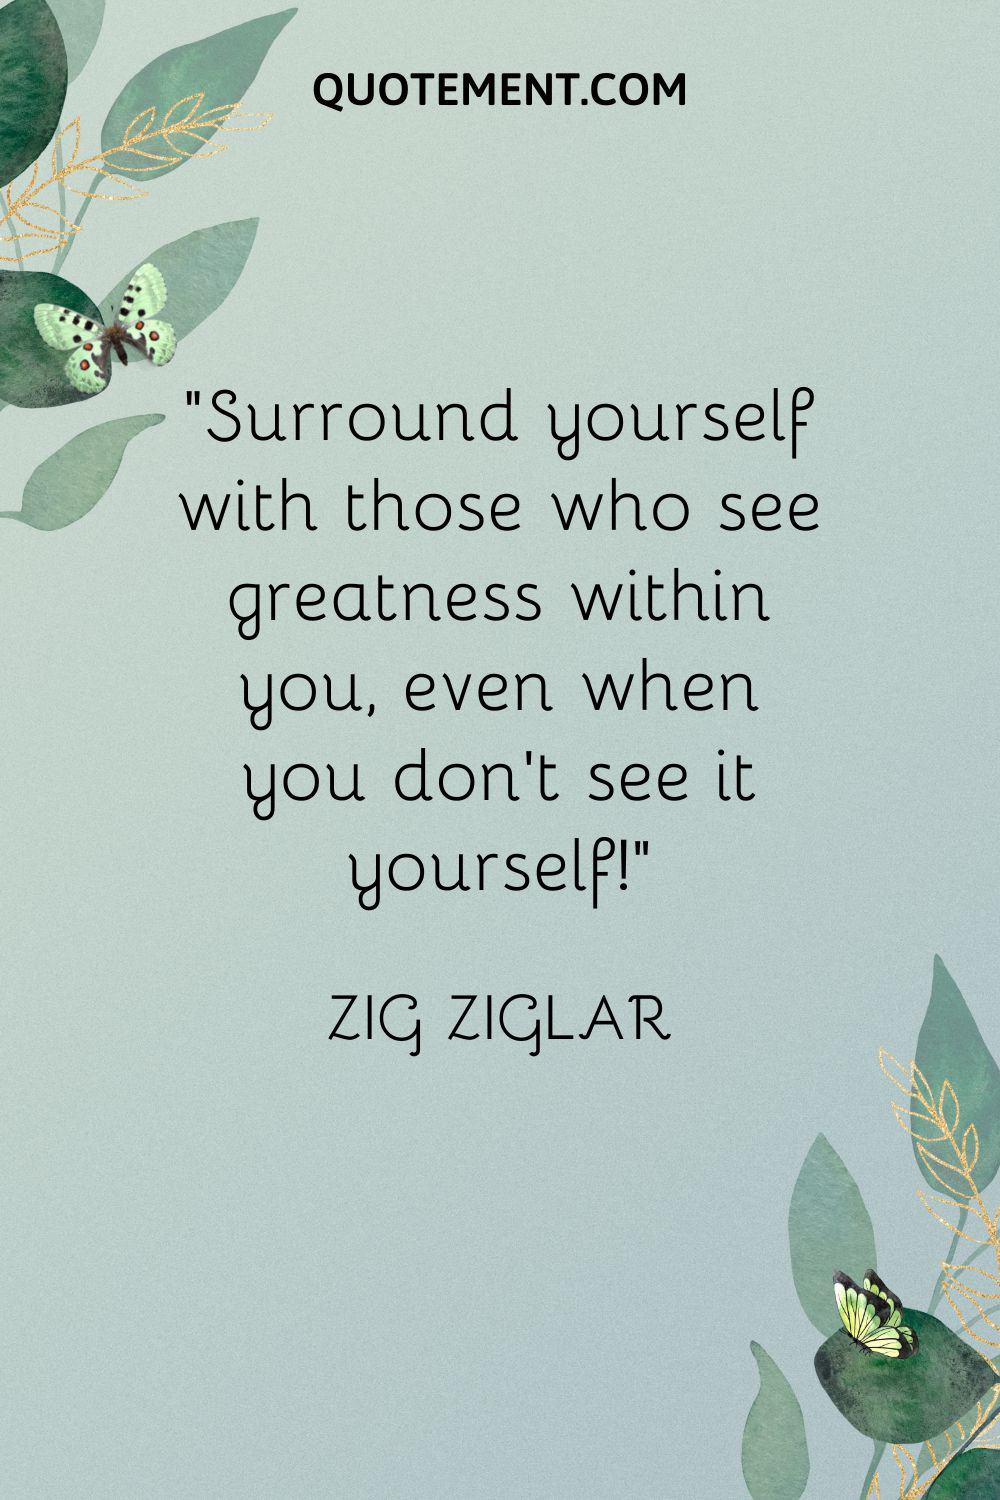 Surround yourself with those who see greatness within you, even when you don’t see it yourself